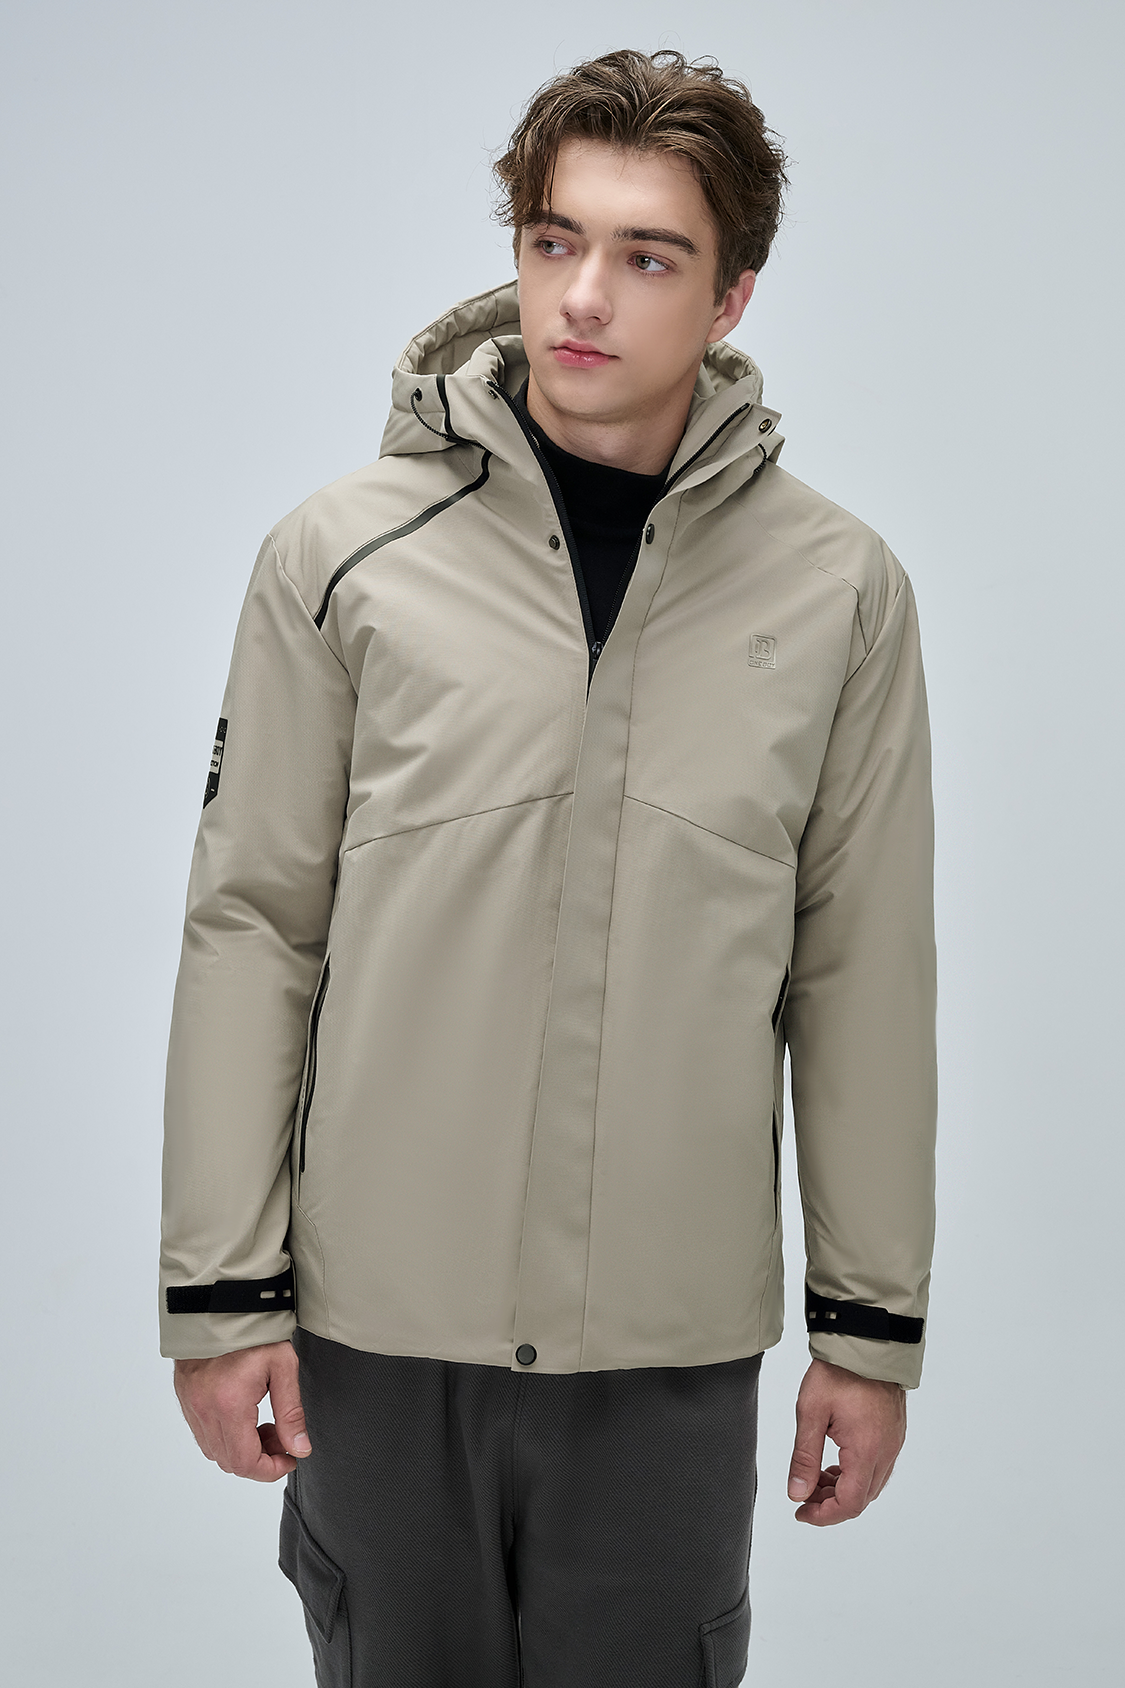 Advanced Thermal Waterproof Functional Jacket with Space Cotton for Men